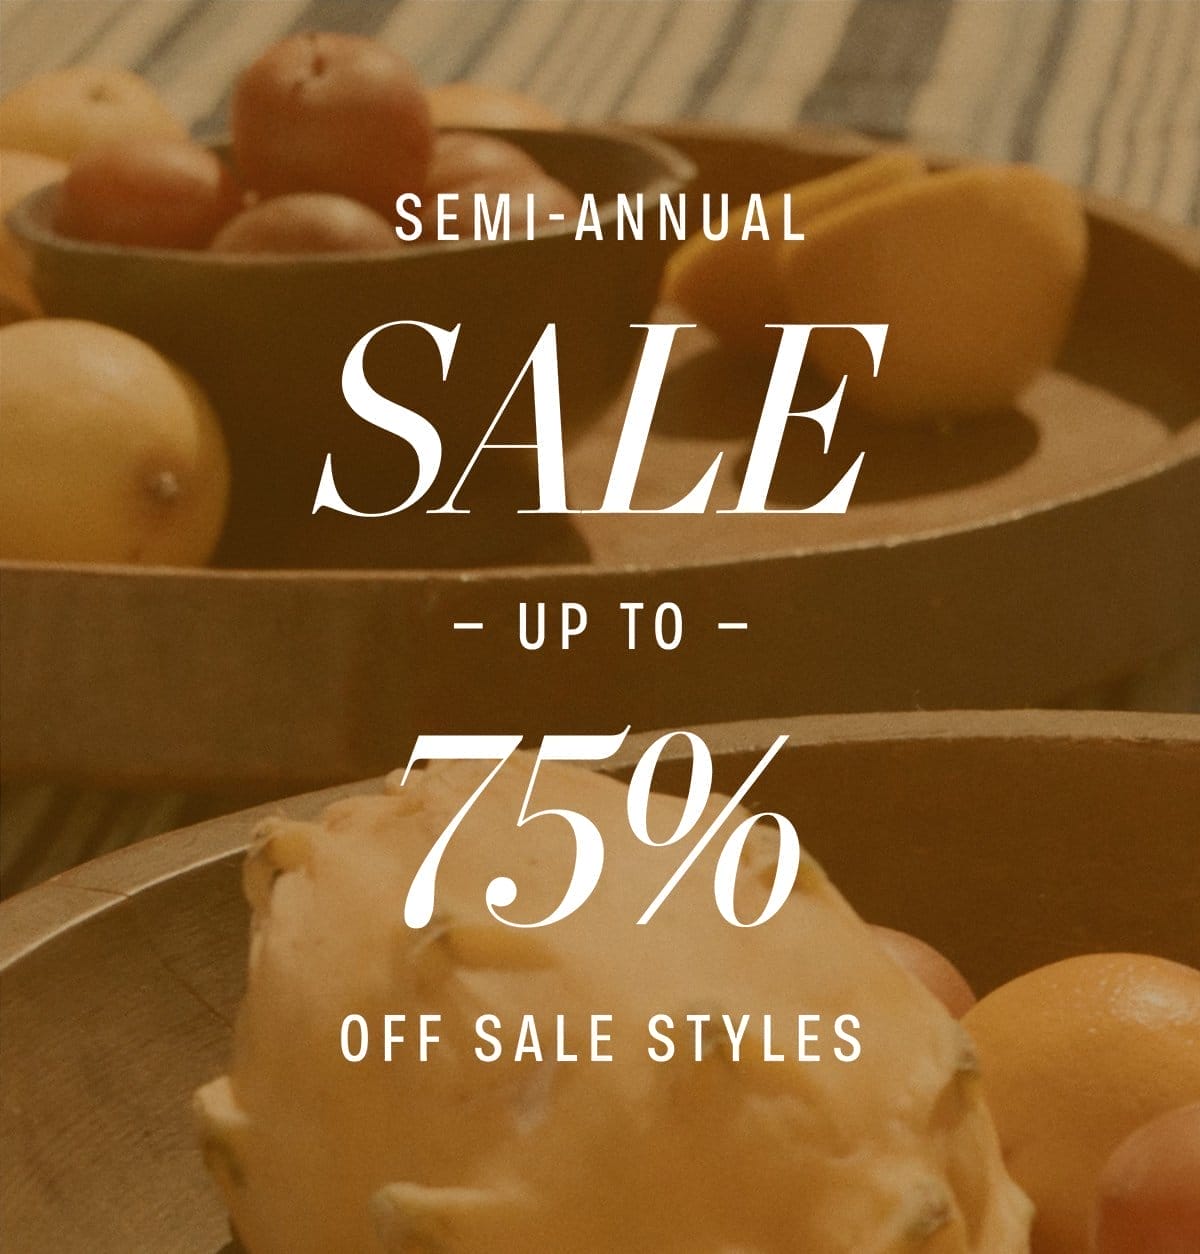 SEMI-ANNUAL SALE! UP TO 75% OFF SALE STYLES